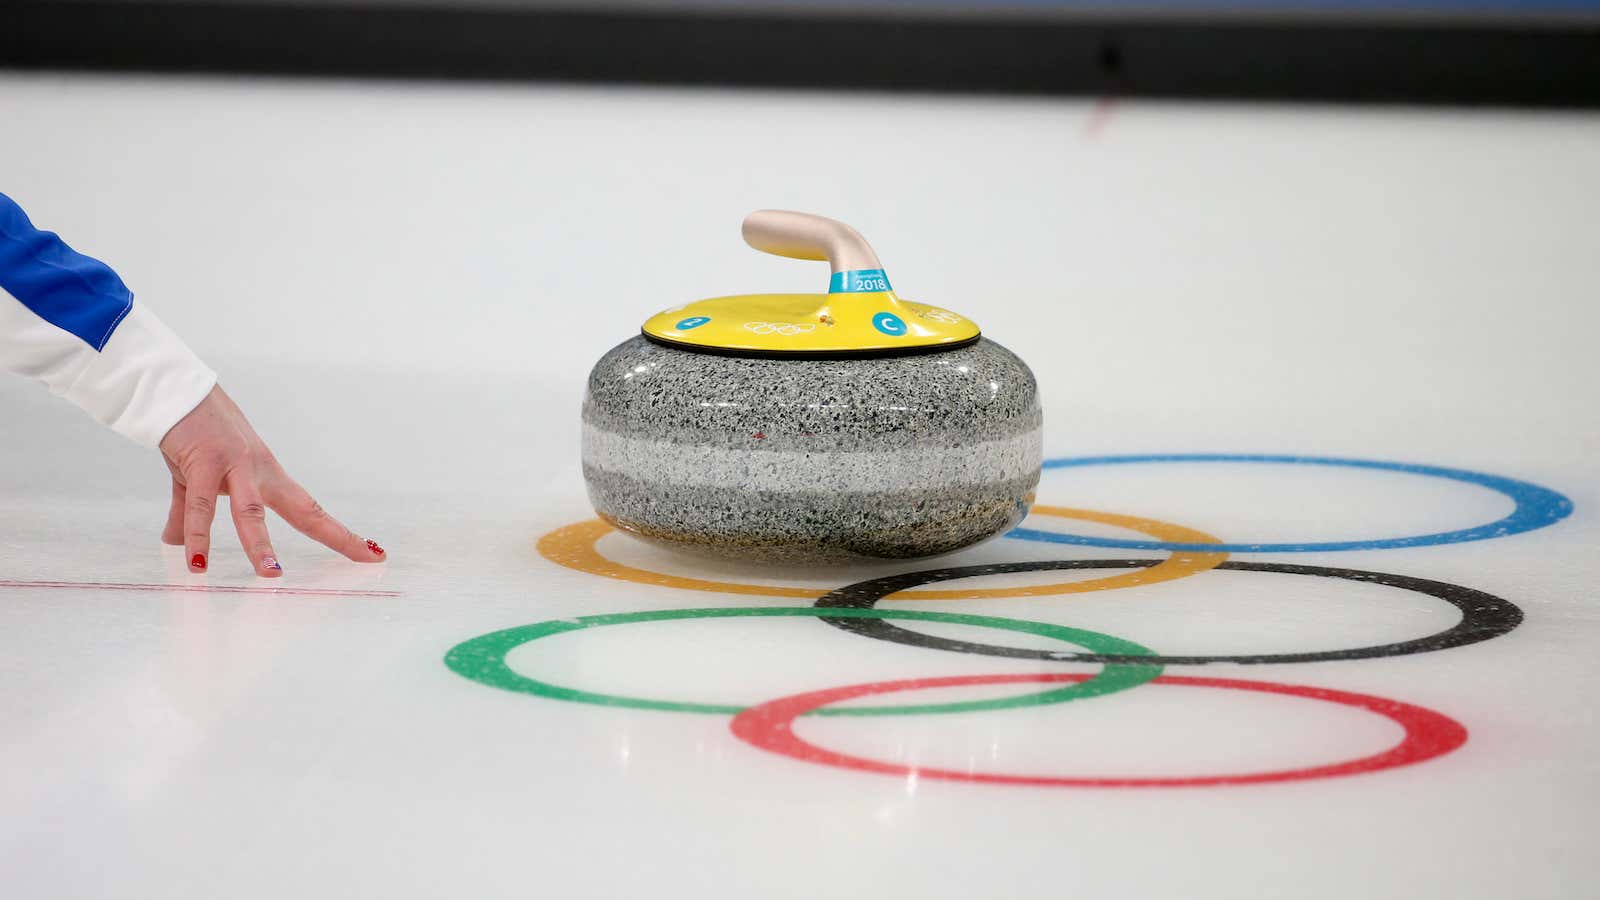 Curling: Archery on ice, except with a 44 lb granite stone.